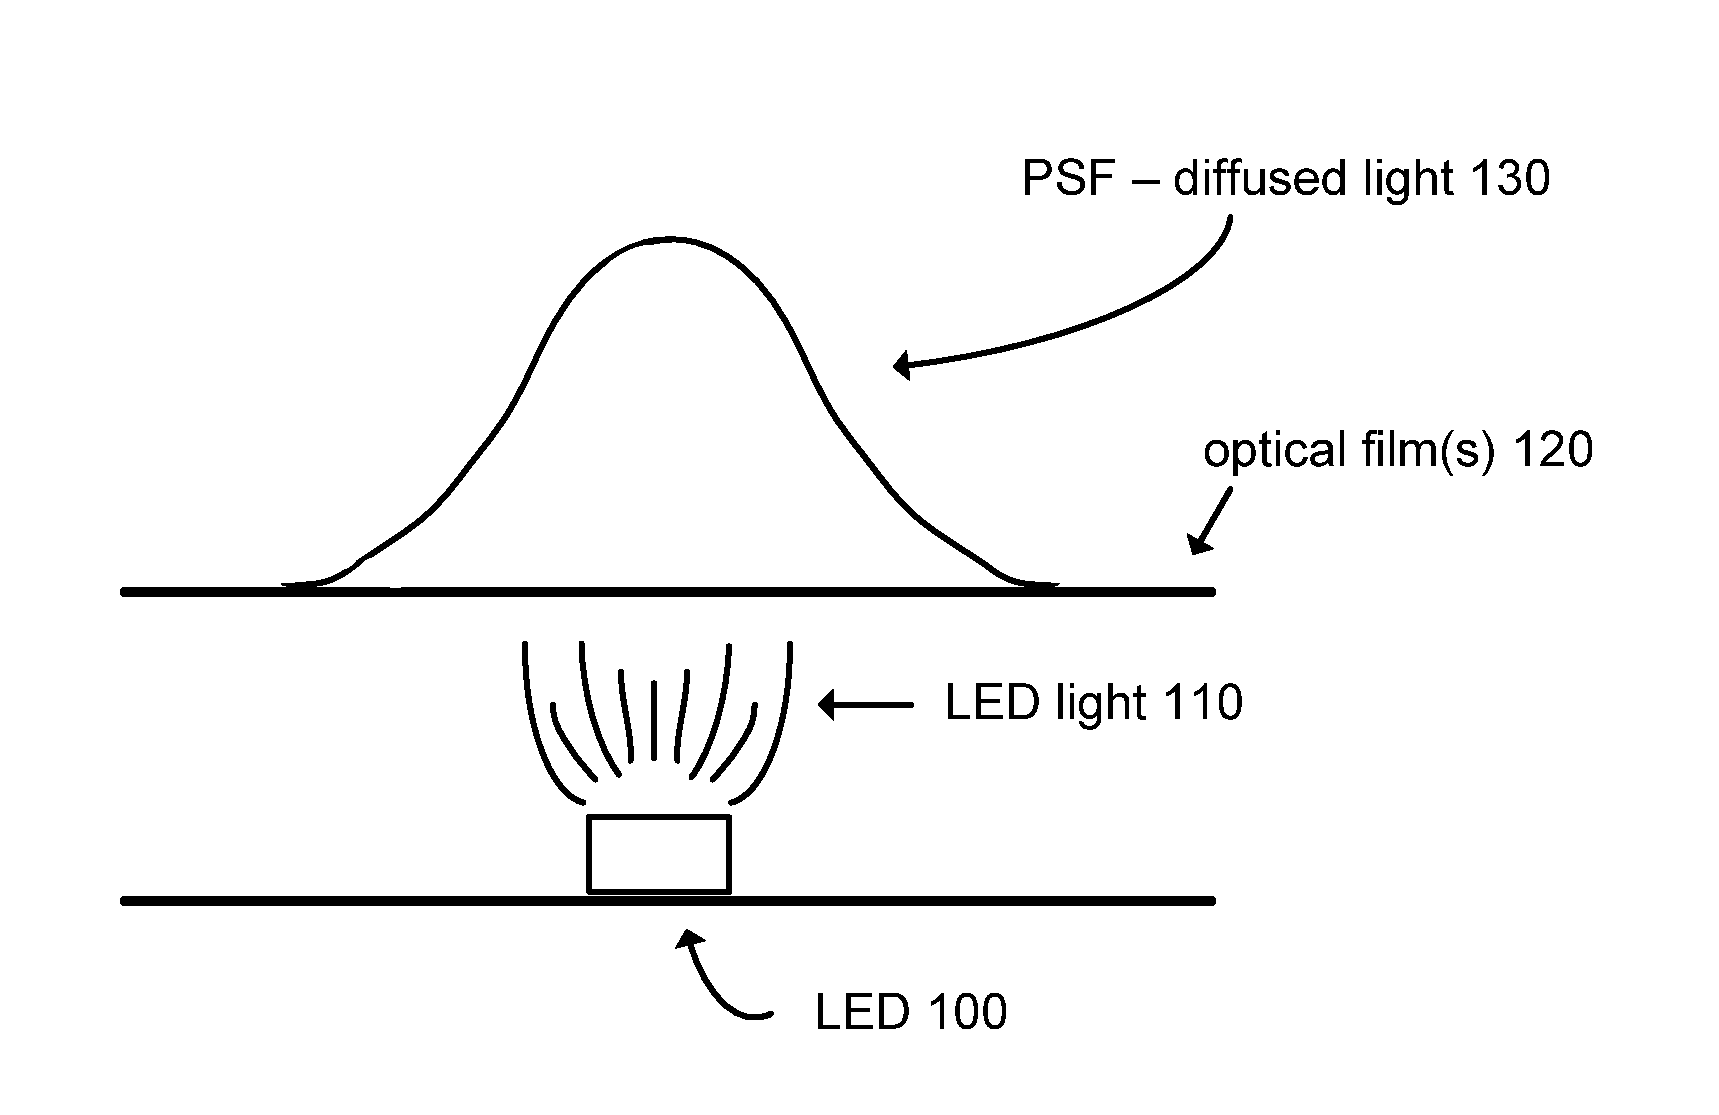 Custom PSFs Using Clustered Light Sources